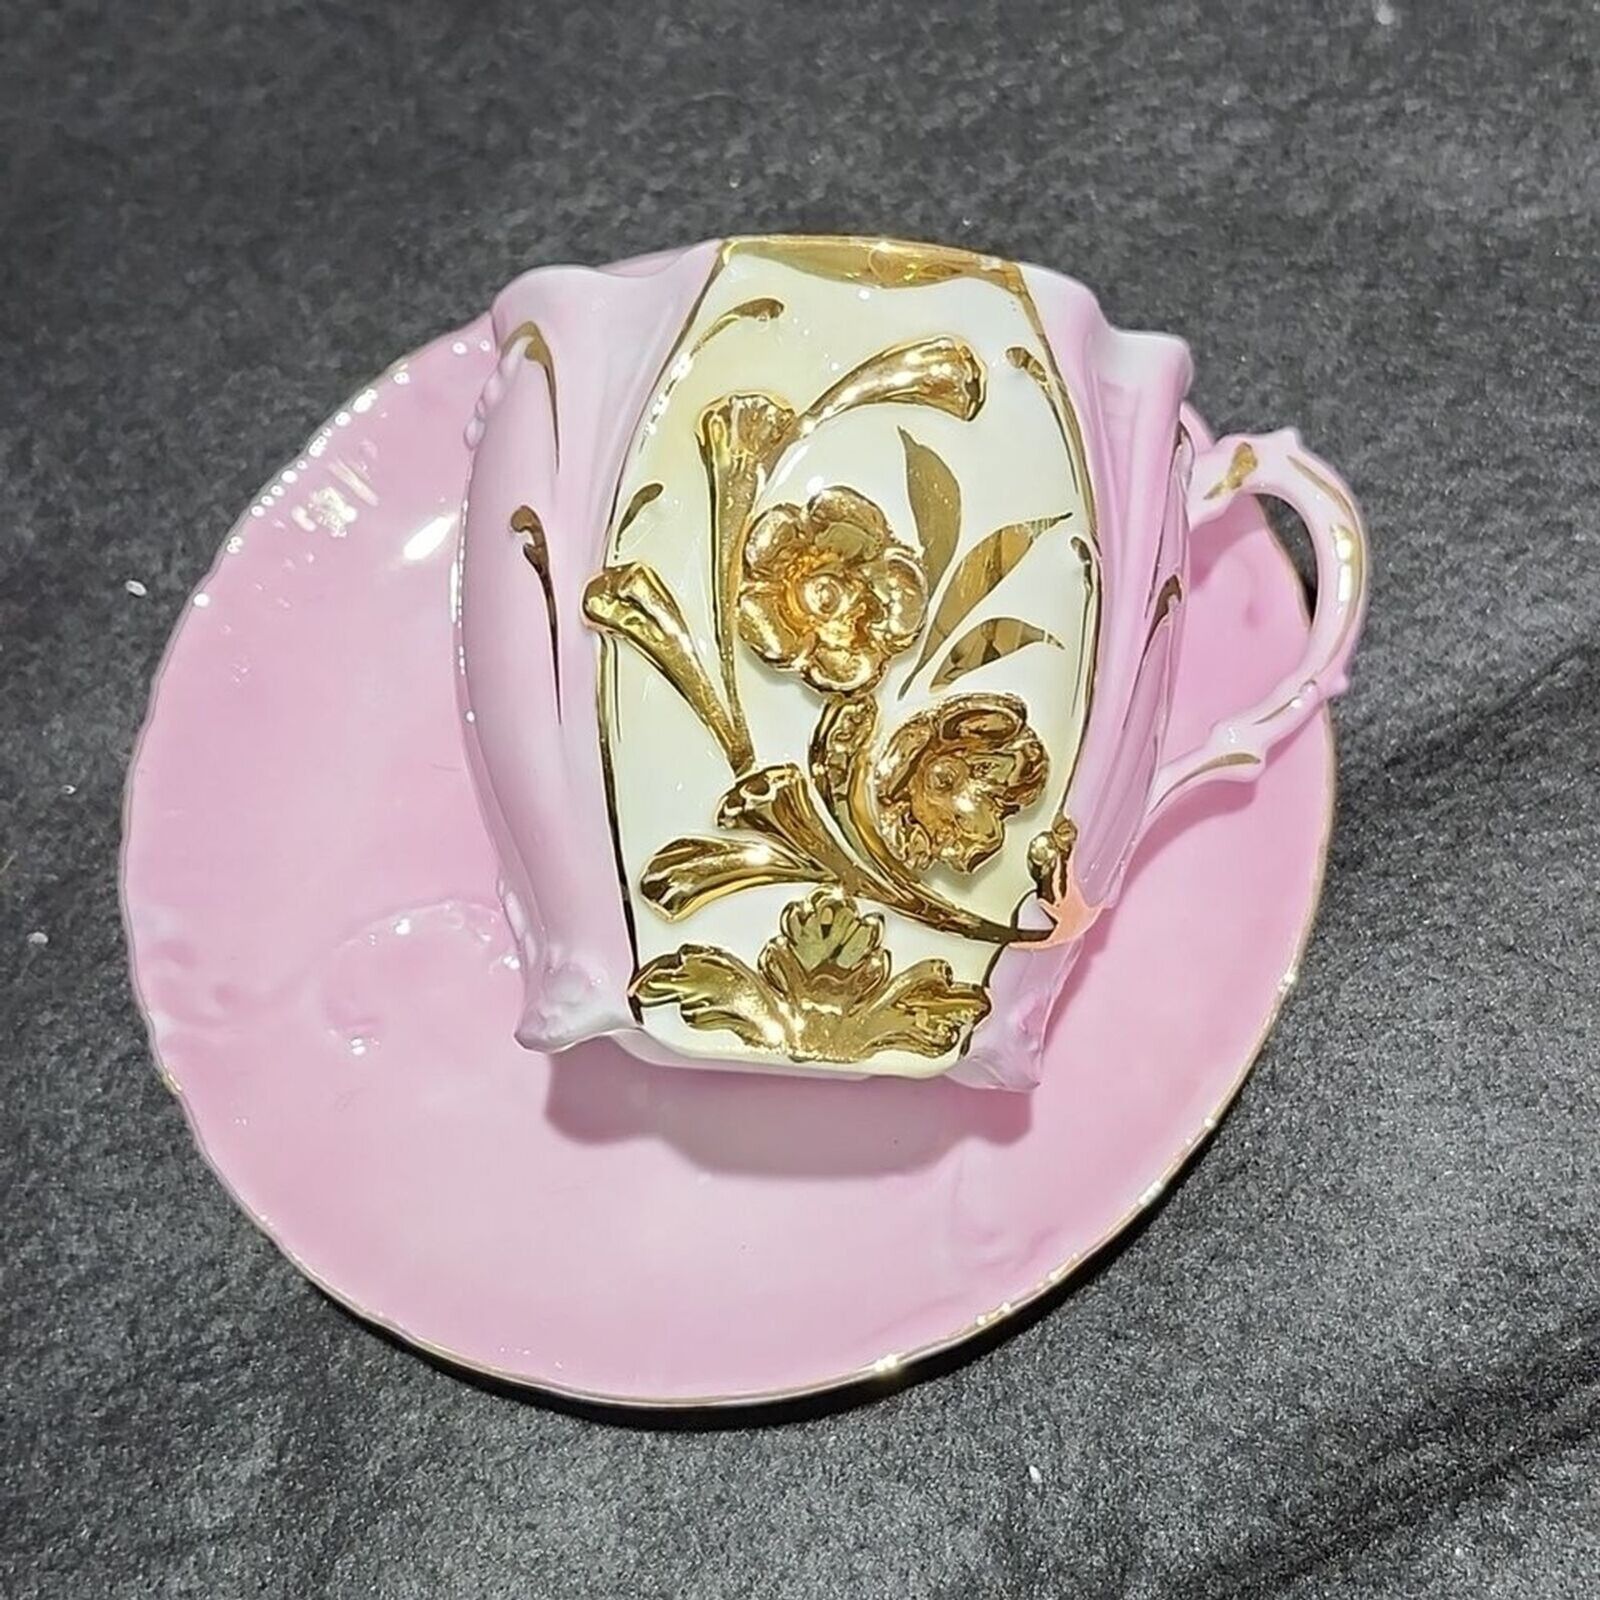 RARE vintage antique gold gilded pink teacup and saucer numbered 227 out of 799